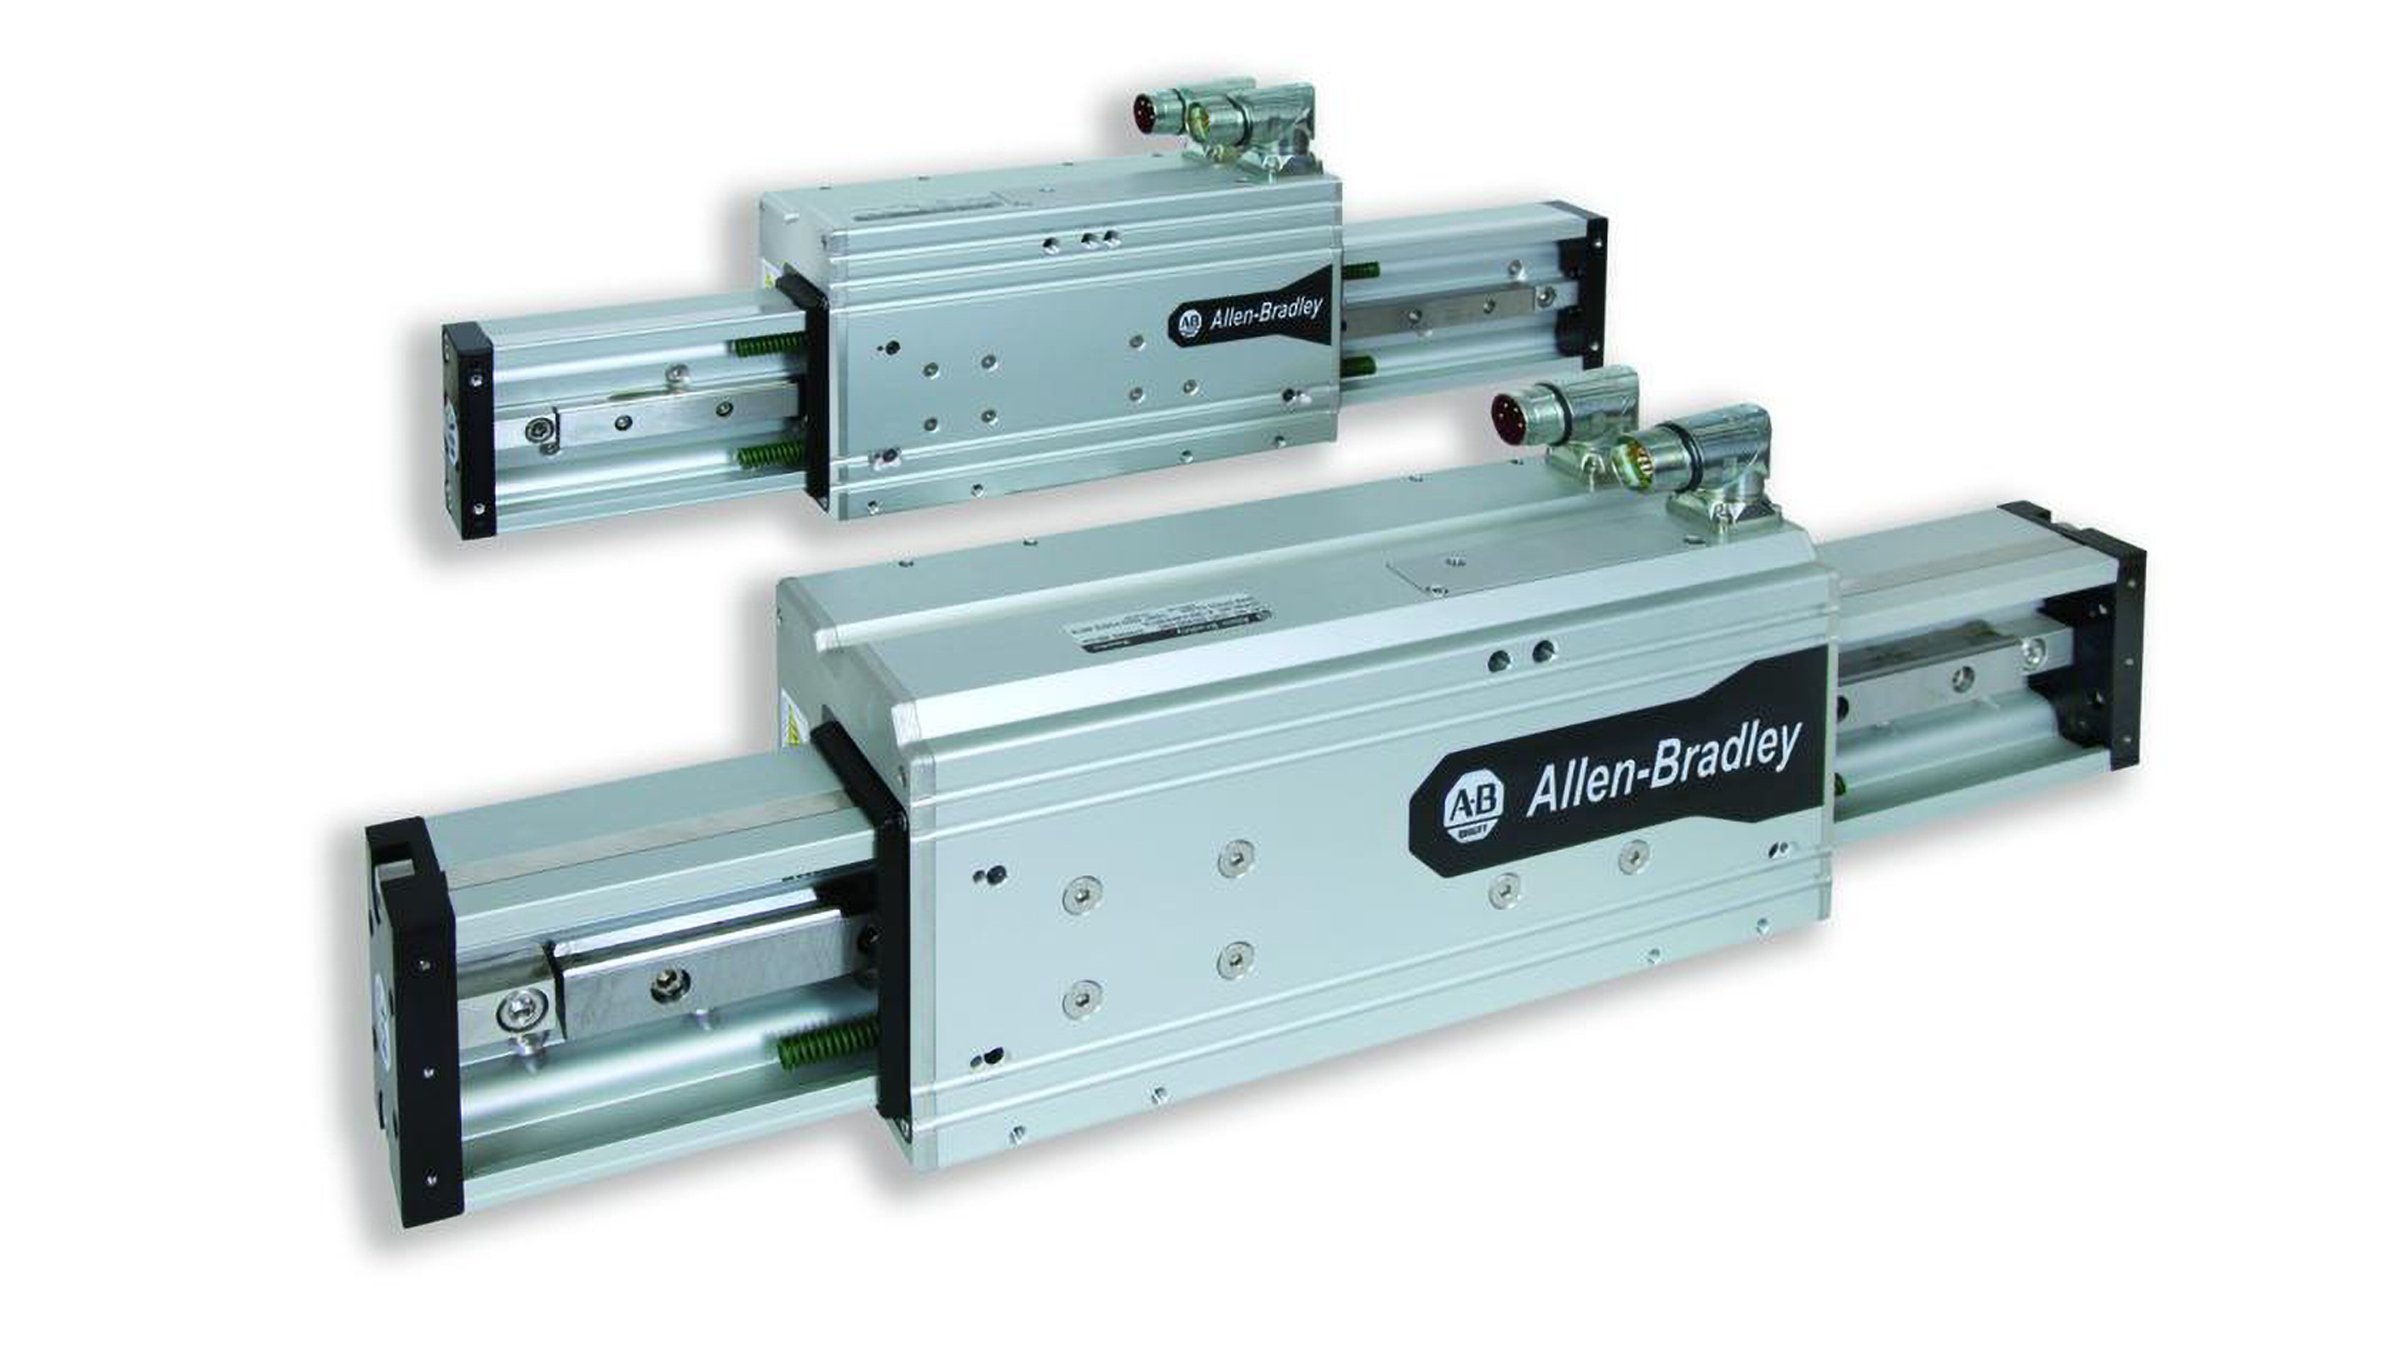 Allen-Bradley Bulletin LDAT Integrated Linear Thrusters provide high-speed, load-bearing linear motion out-of-the-box and are capable of pushing, pulling, or carrying a load.